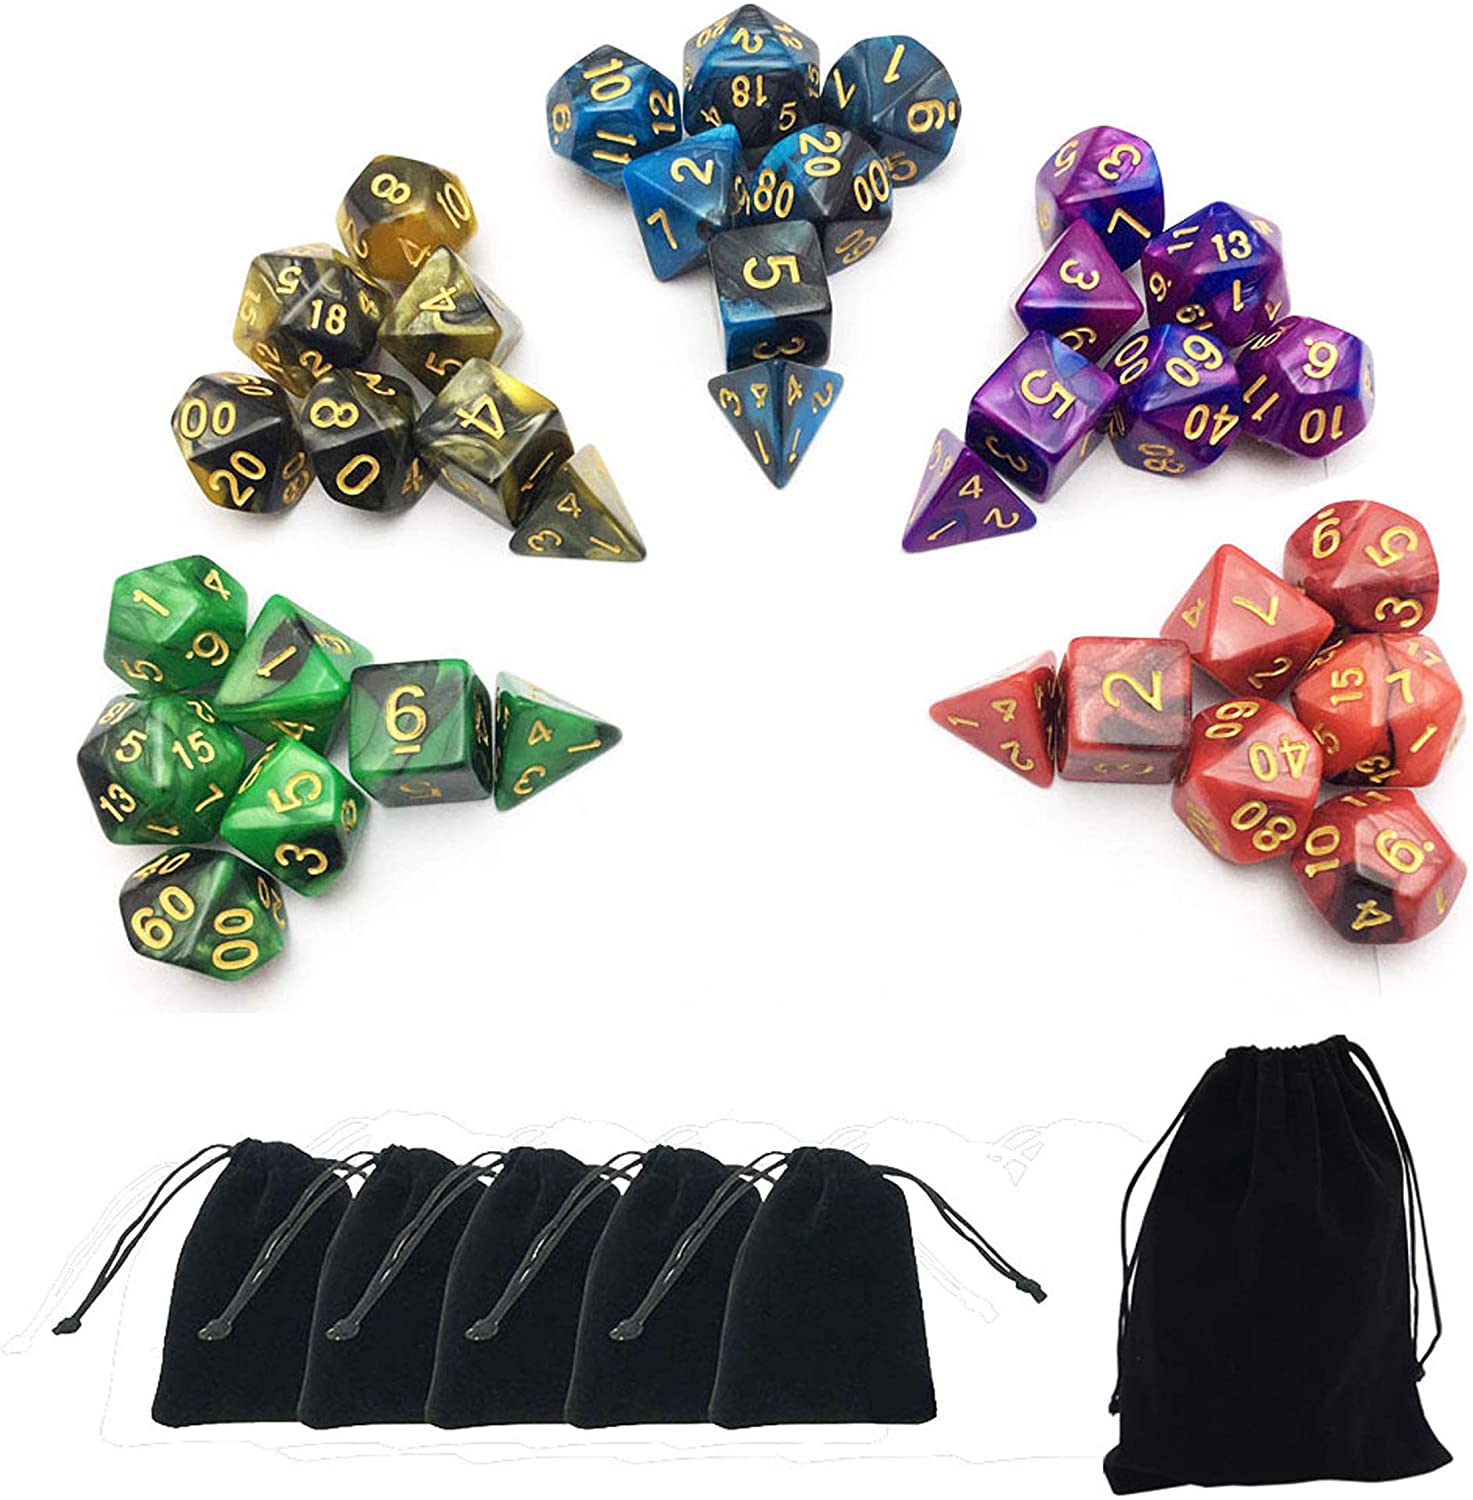 7-die Polyhedral Dice for Dungeons and Dragons DND RPG D20 D12 D10 D8 D6 D4 Game 